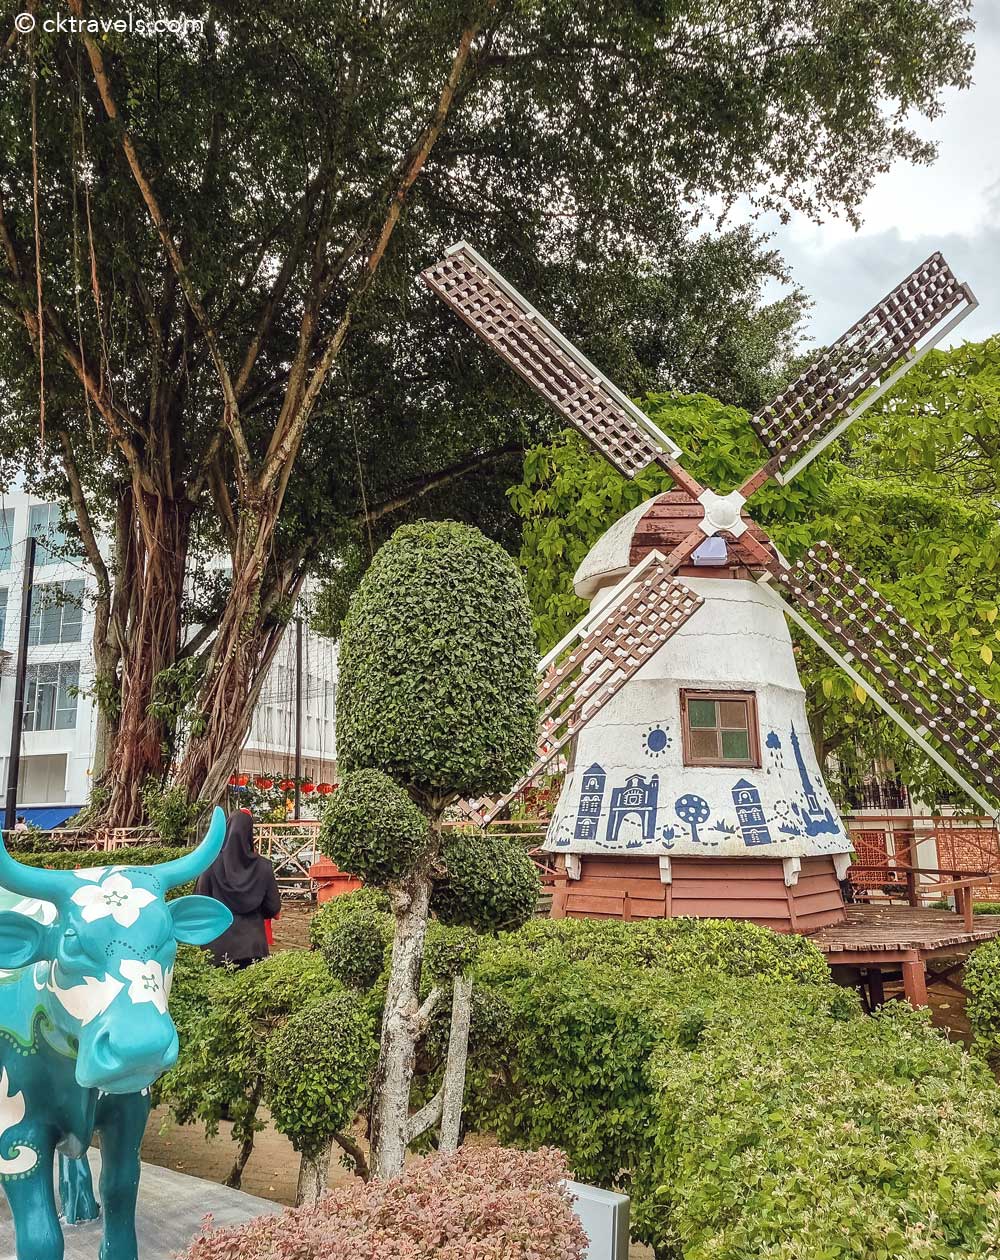 Melaka Red Square / Stadthuys windmill and cow